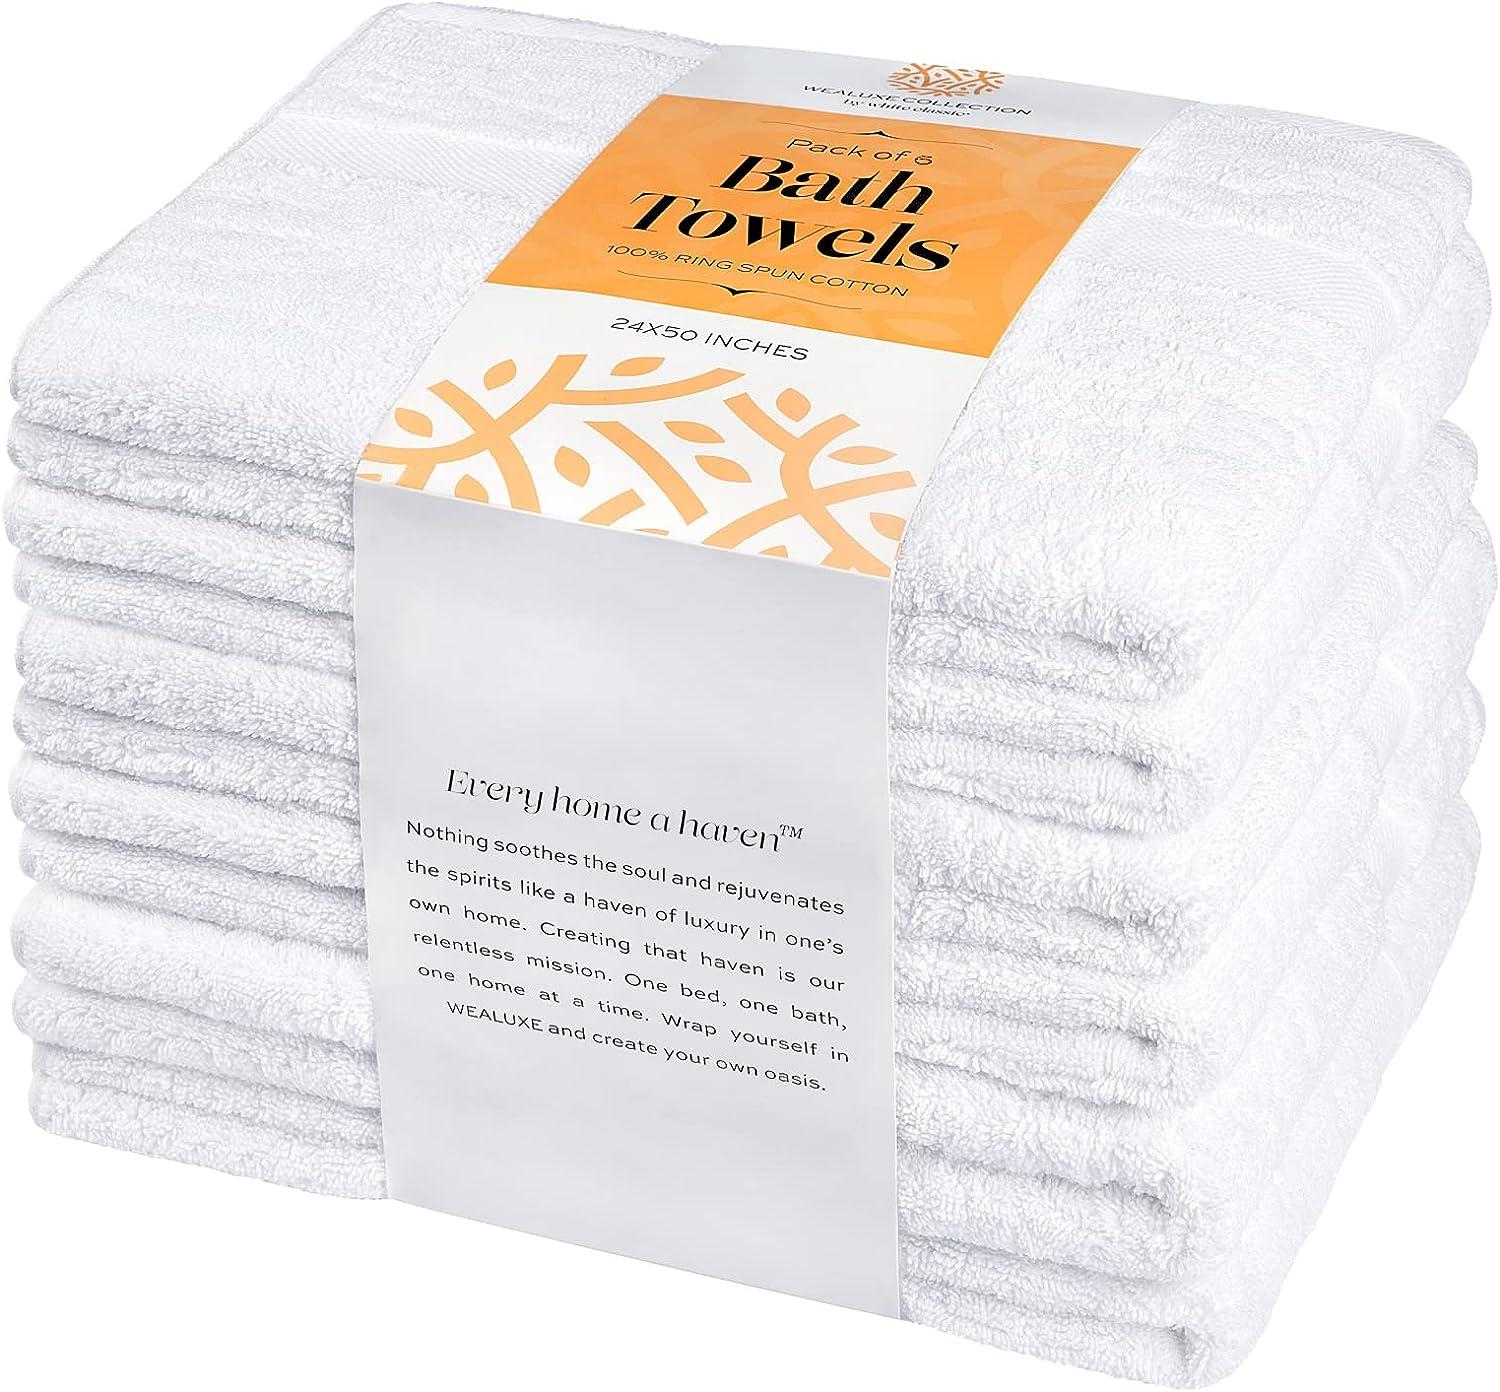 White Classic Hand Towels White Wealuxe Collection Hand Towels, 100% Cotton  Soft and Lightweight Bath Hand Towels Washable for Bathroom for Home or